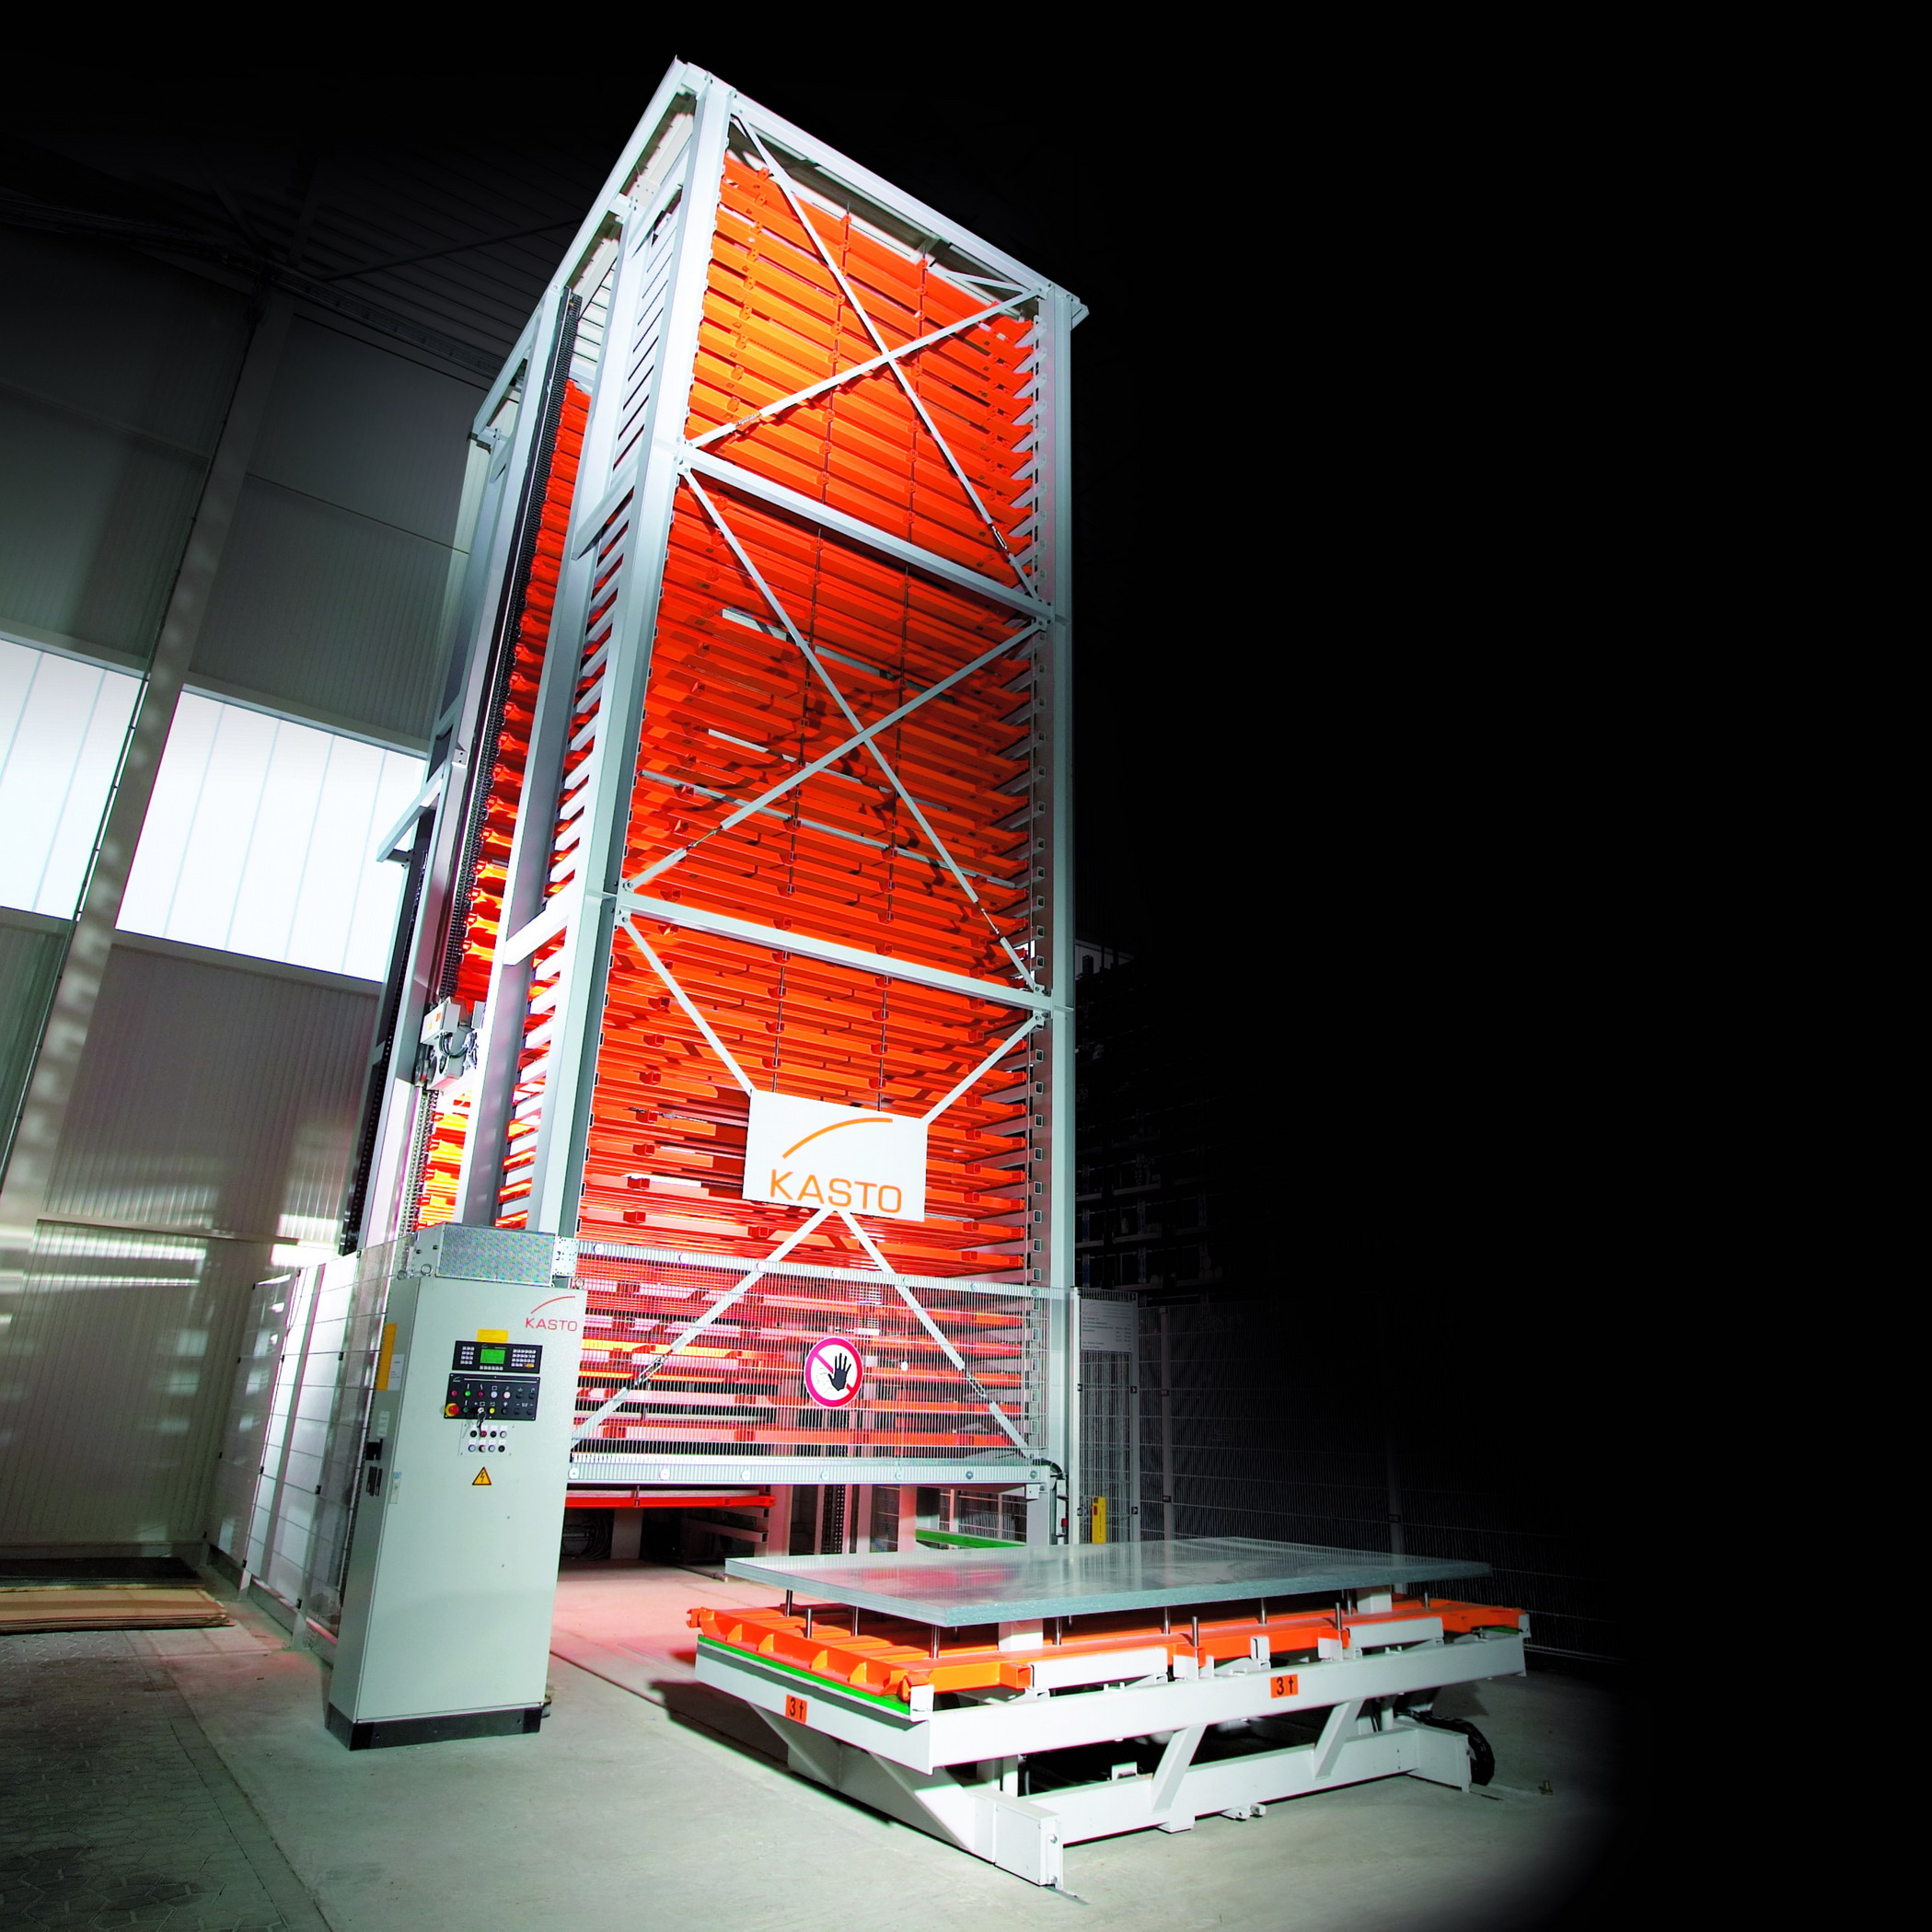 Kasto introduces innovative energy recovery and storage concept Logistics Inside Logistics Inside